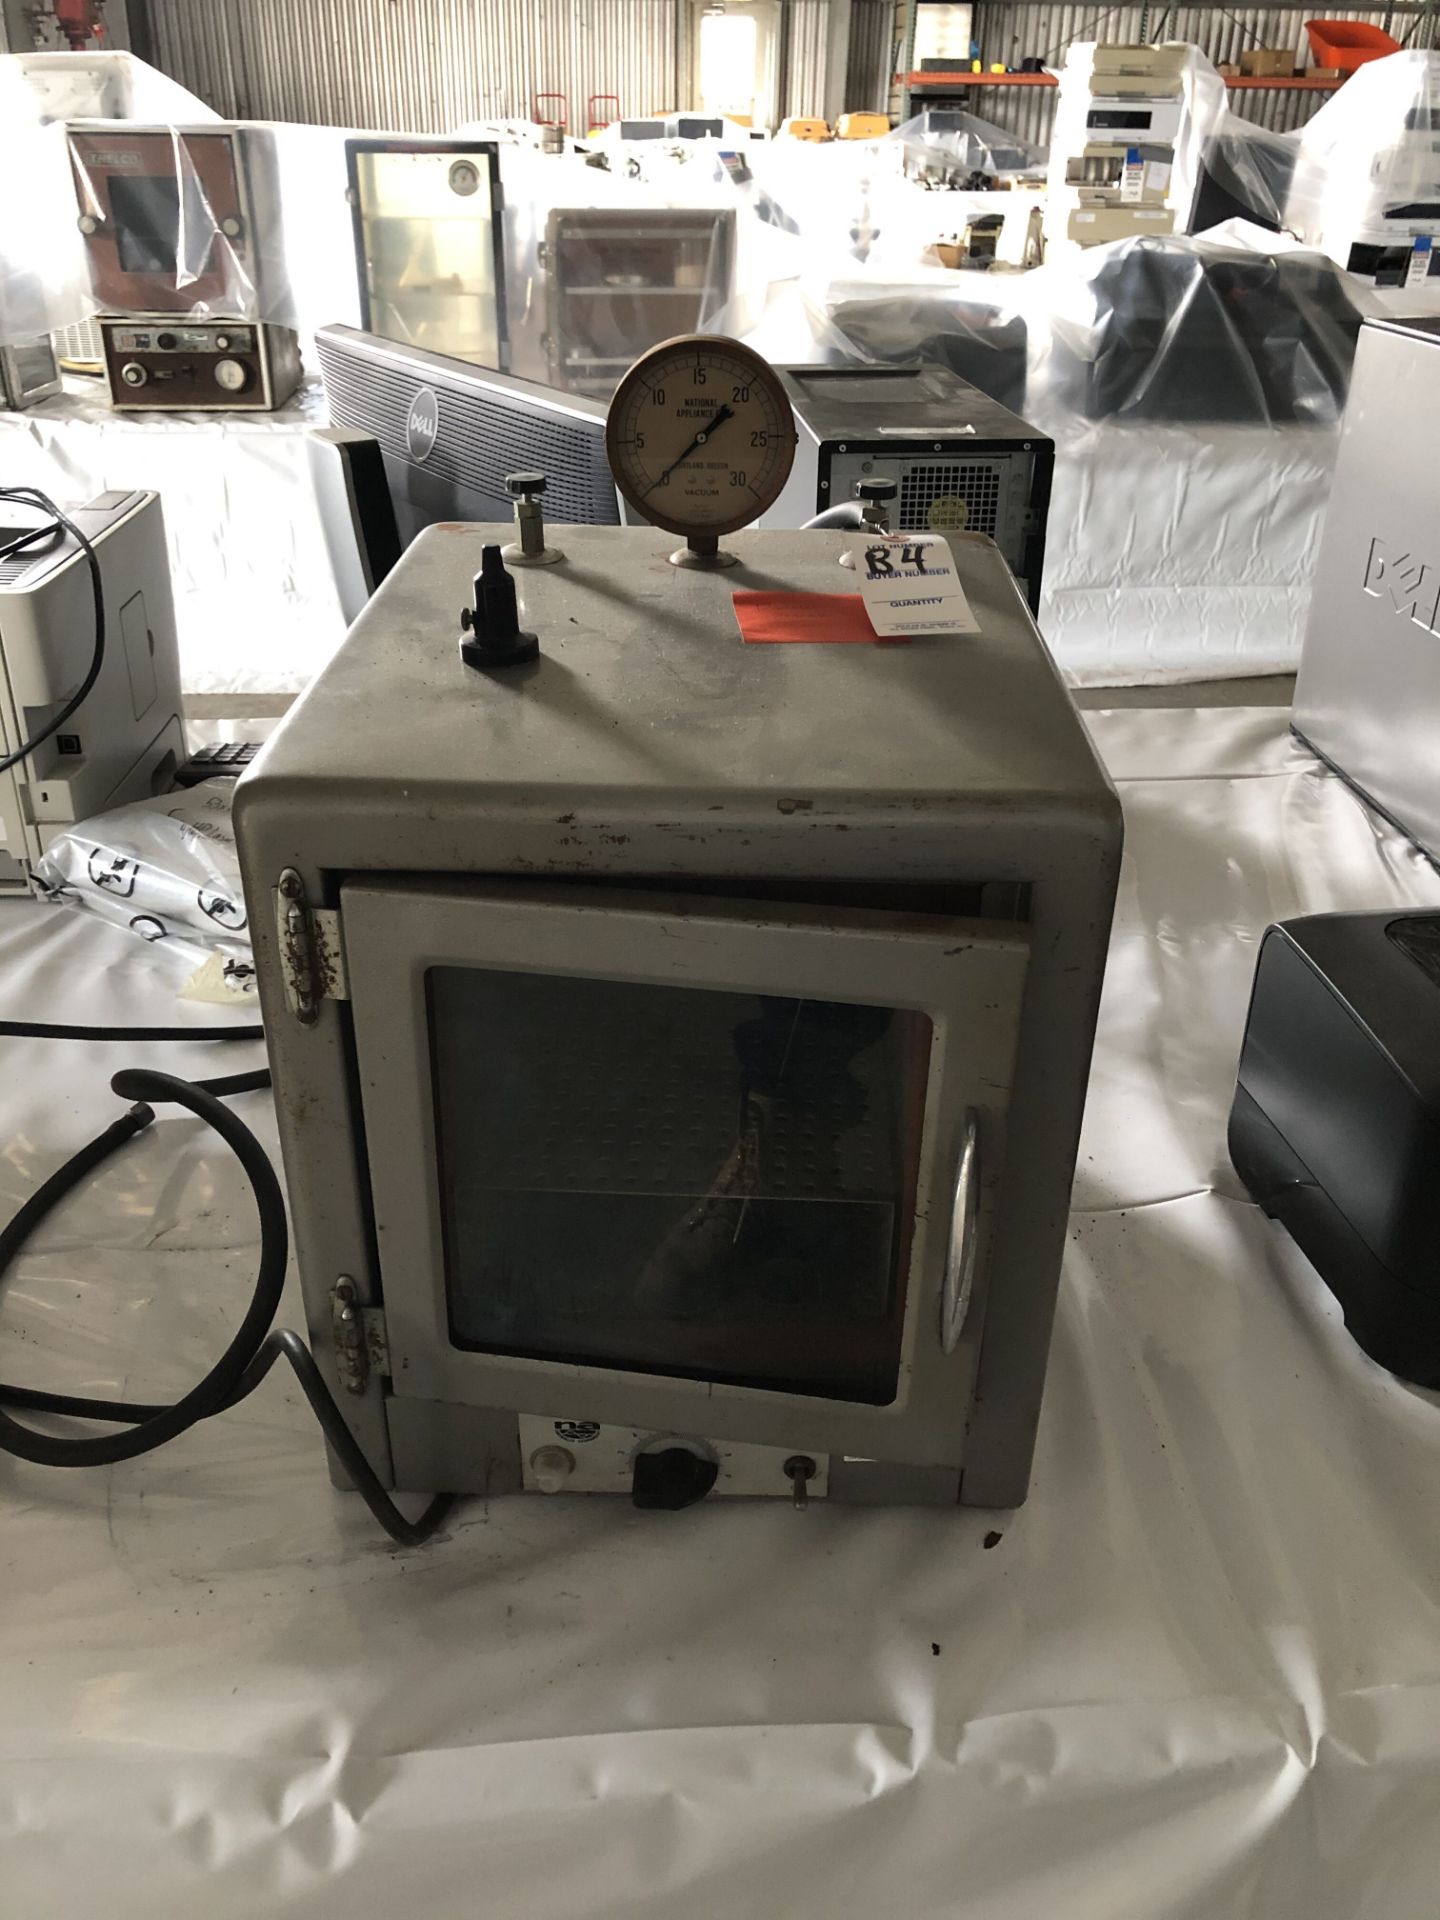 National Appliance Co. Vacuum Oven, Model #5831, S/N #SG-64, 550 Watts